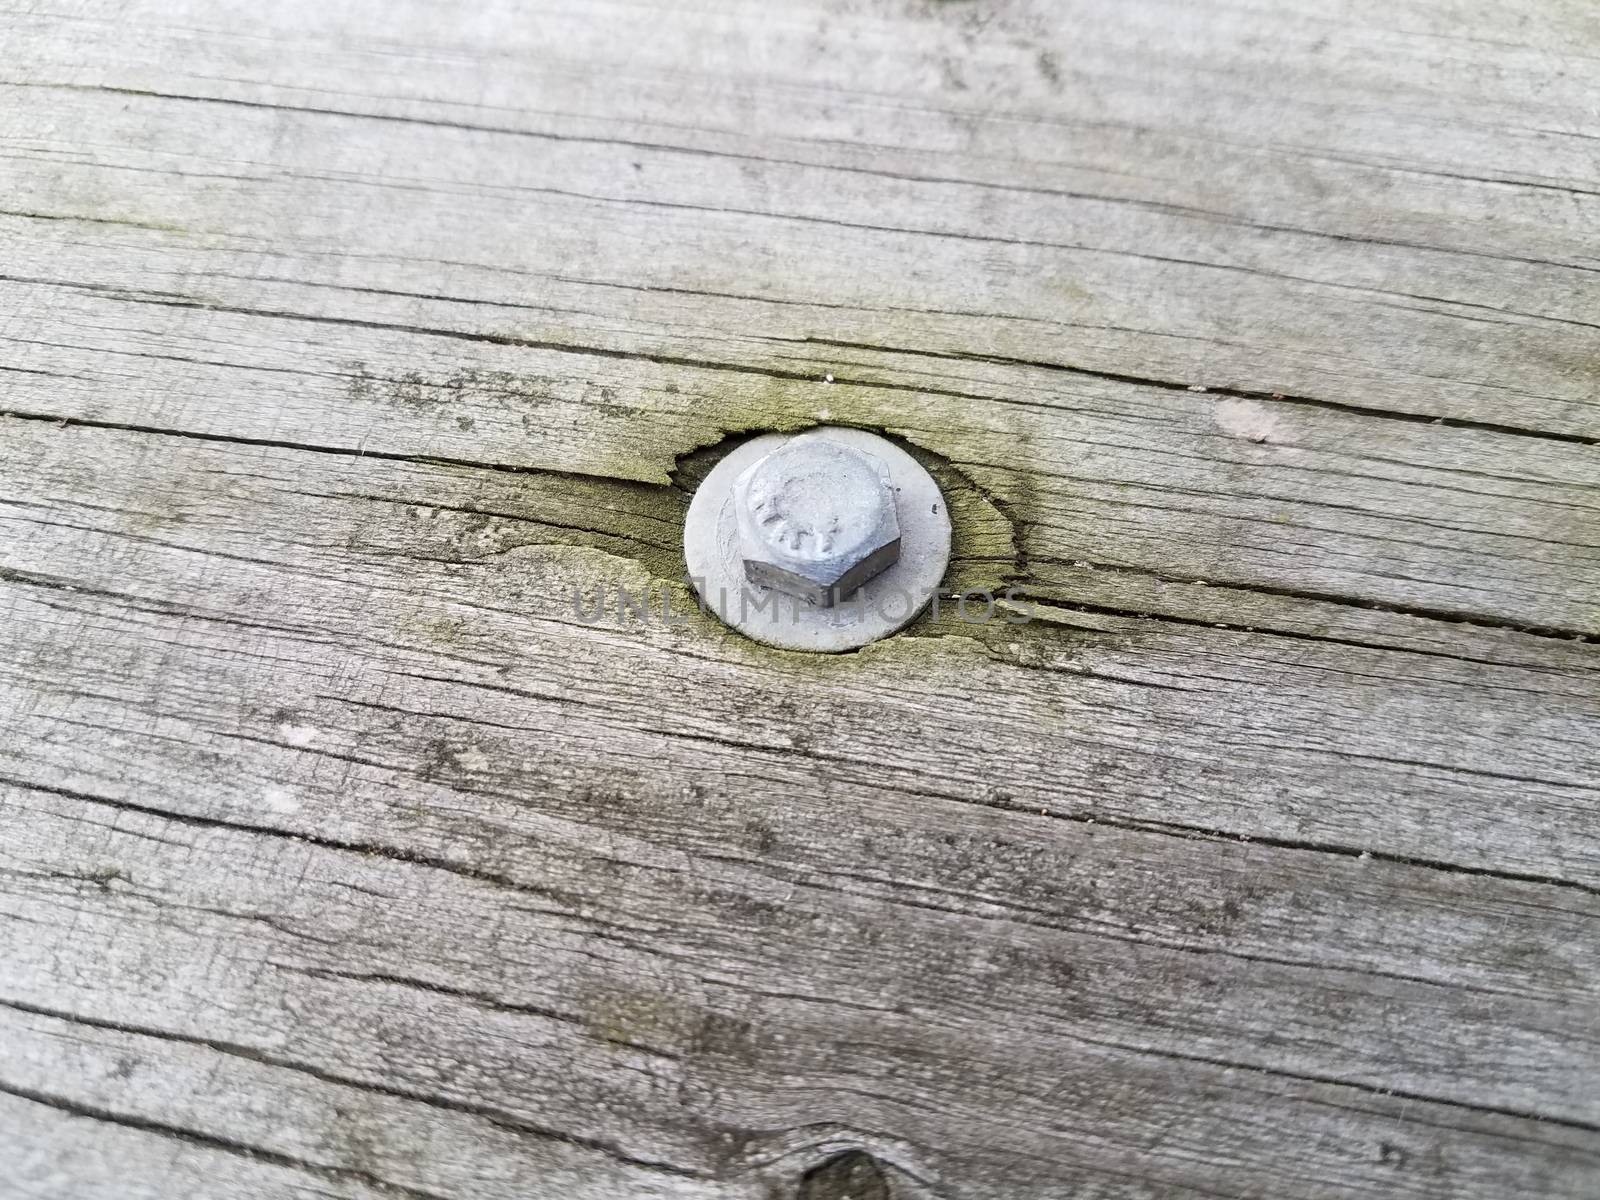 metal screw or bolt with washer in wood board